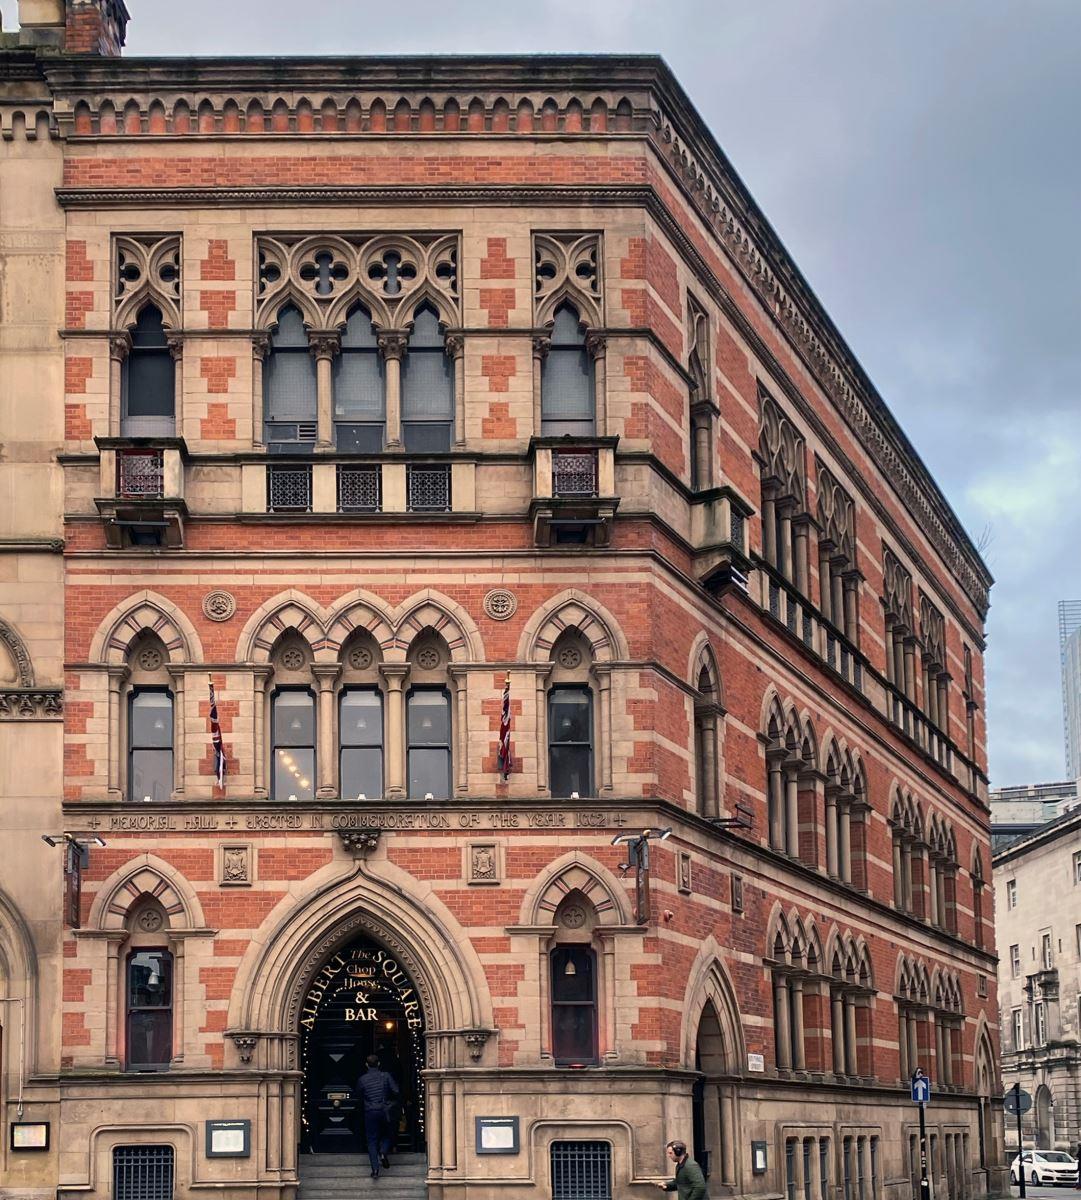 High Victorian Gothic Thomas Worthington S Venetian Hall At The Heart Of Manchester Visit Manchester